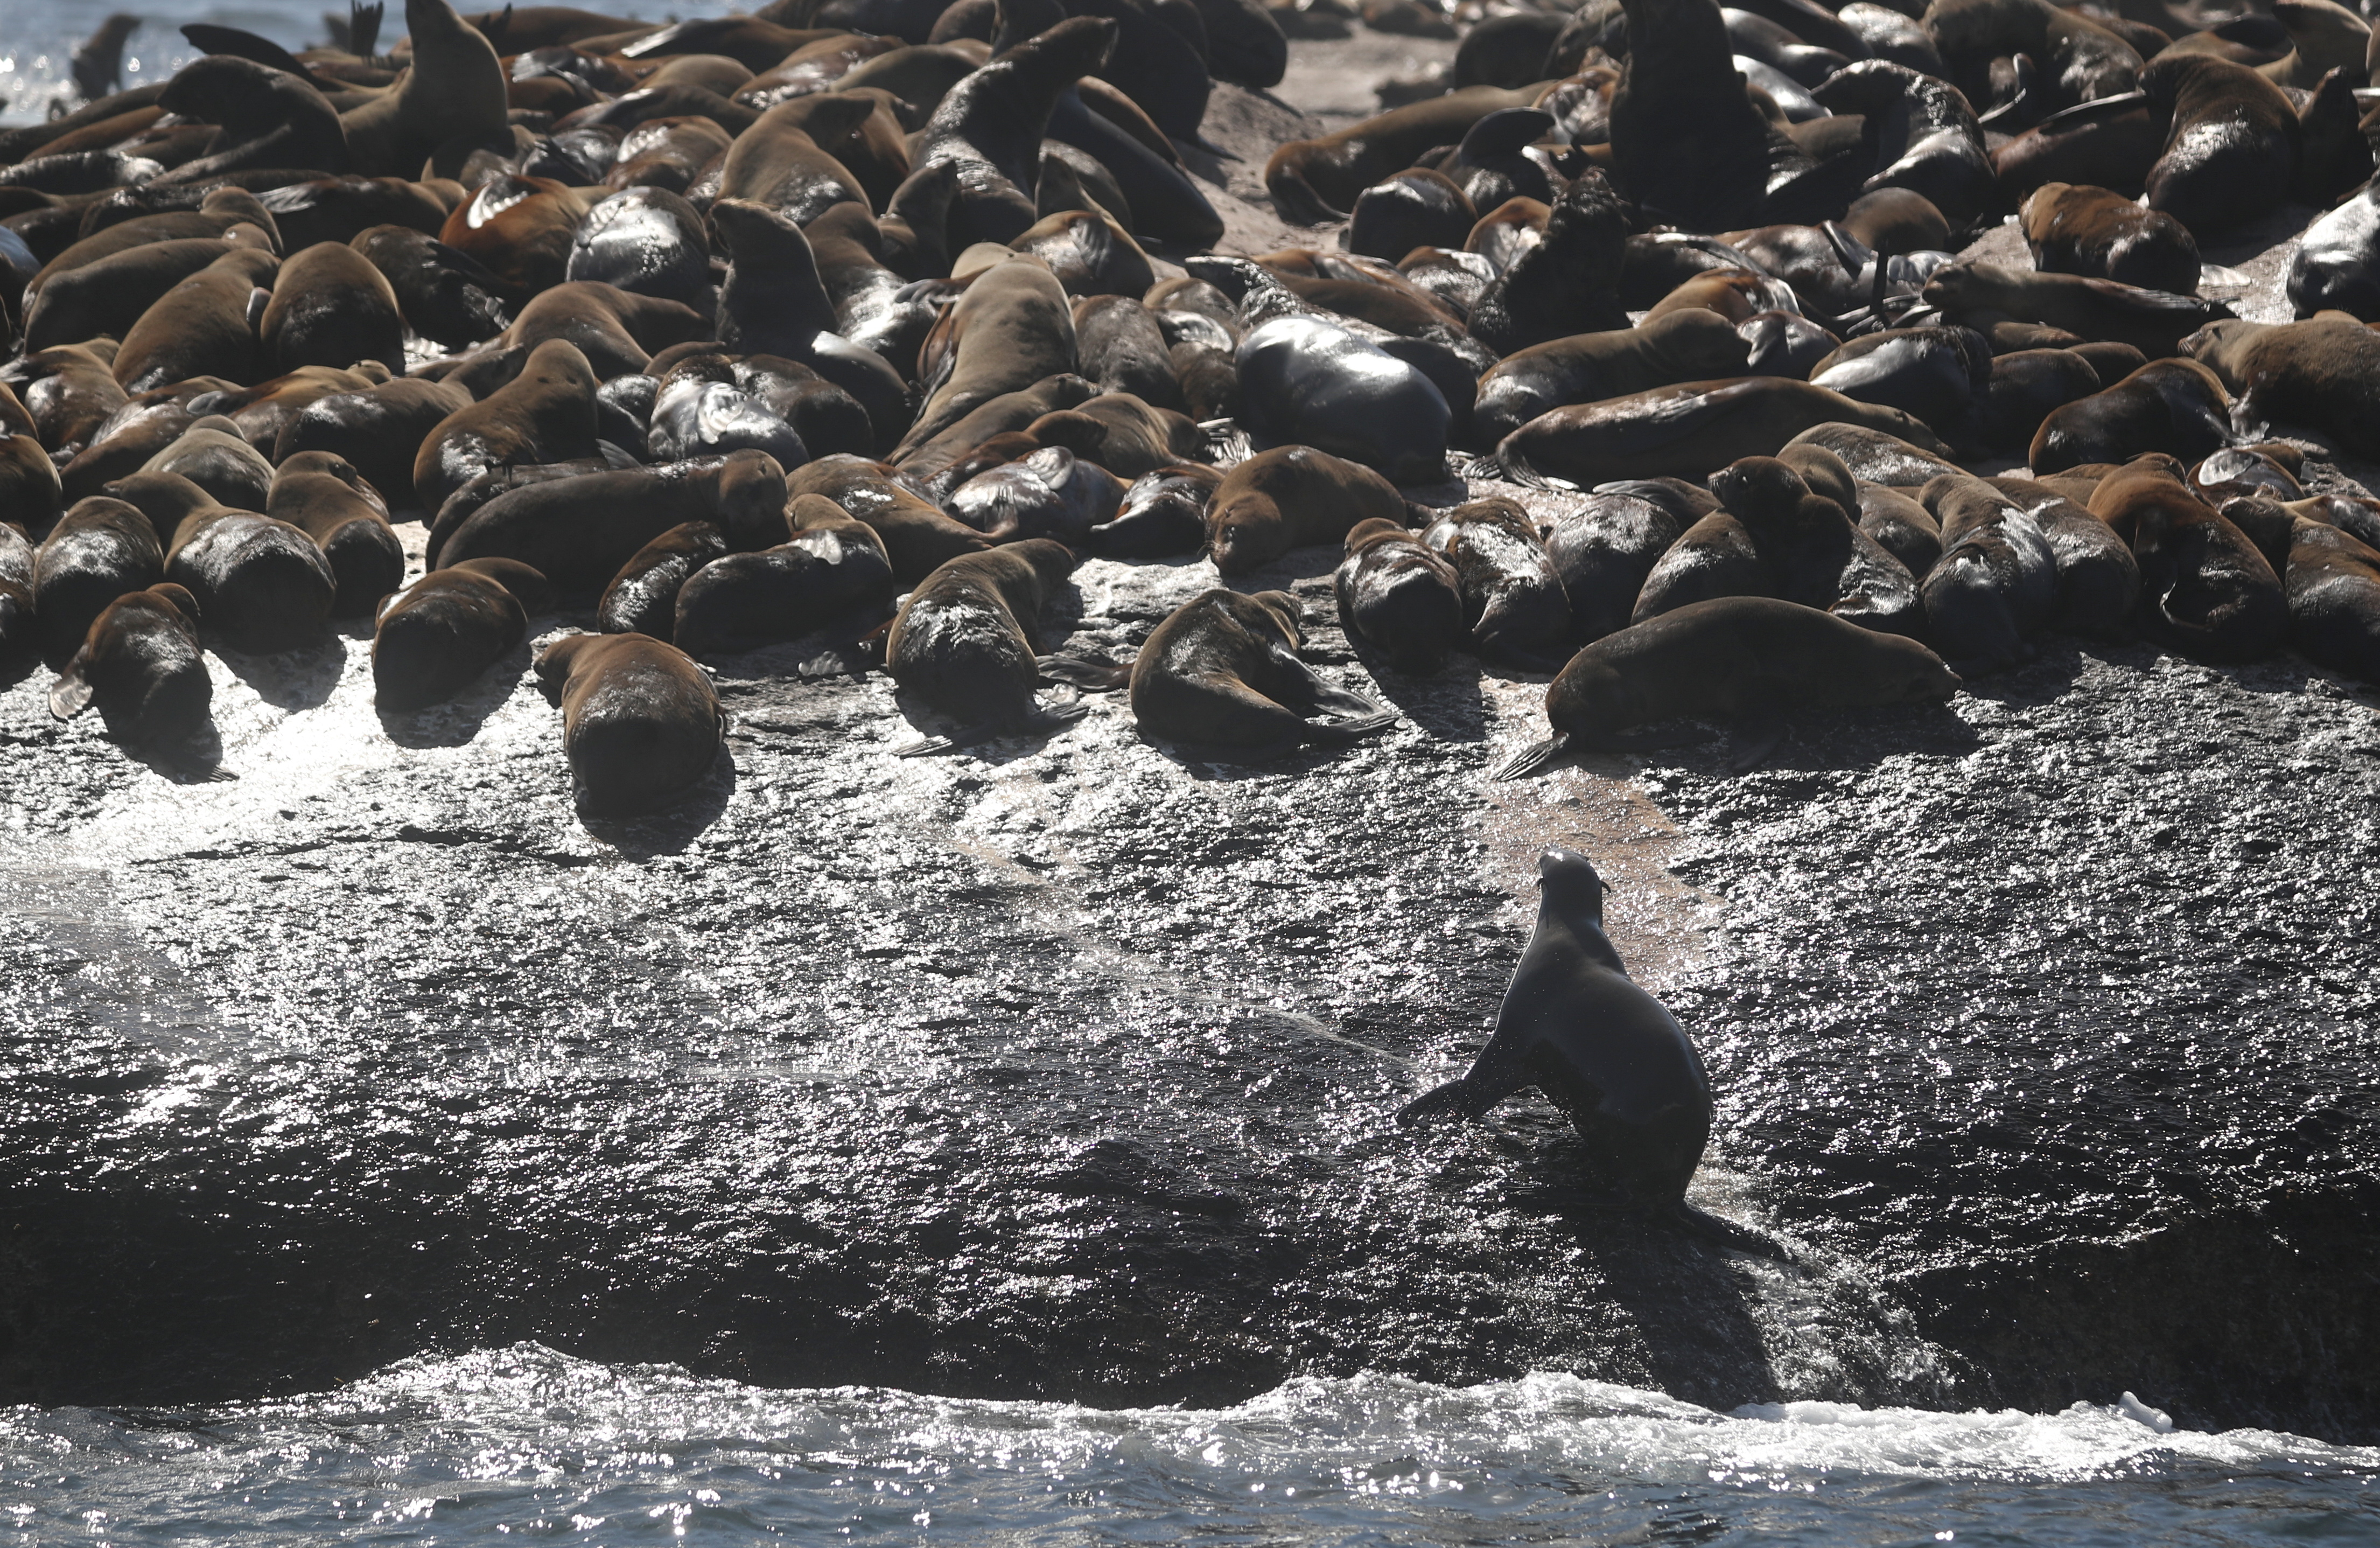 A colony of Cape fur seals crowd onto rocks in Hout Bay, near Cape Town